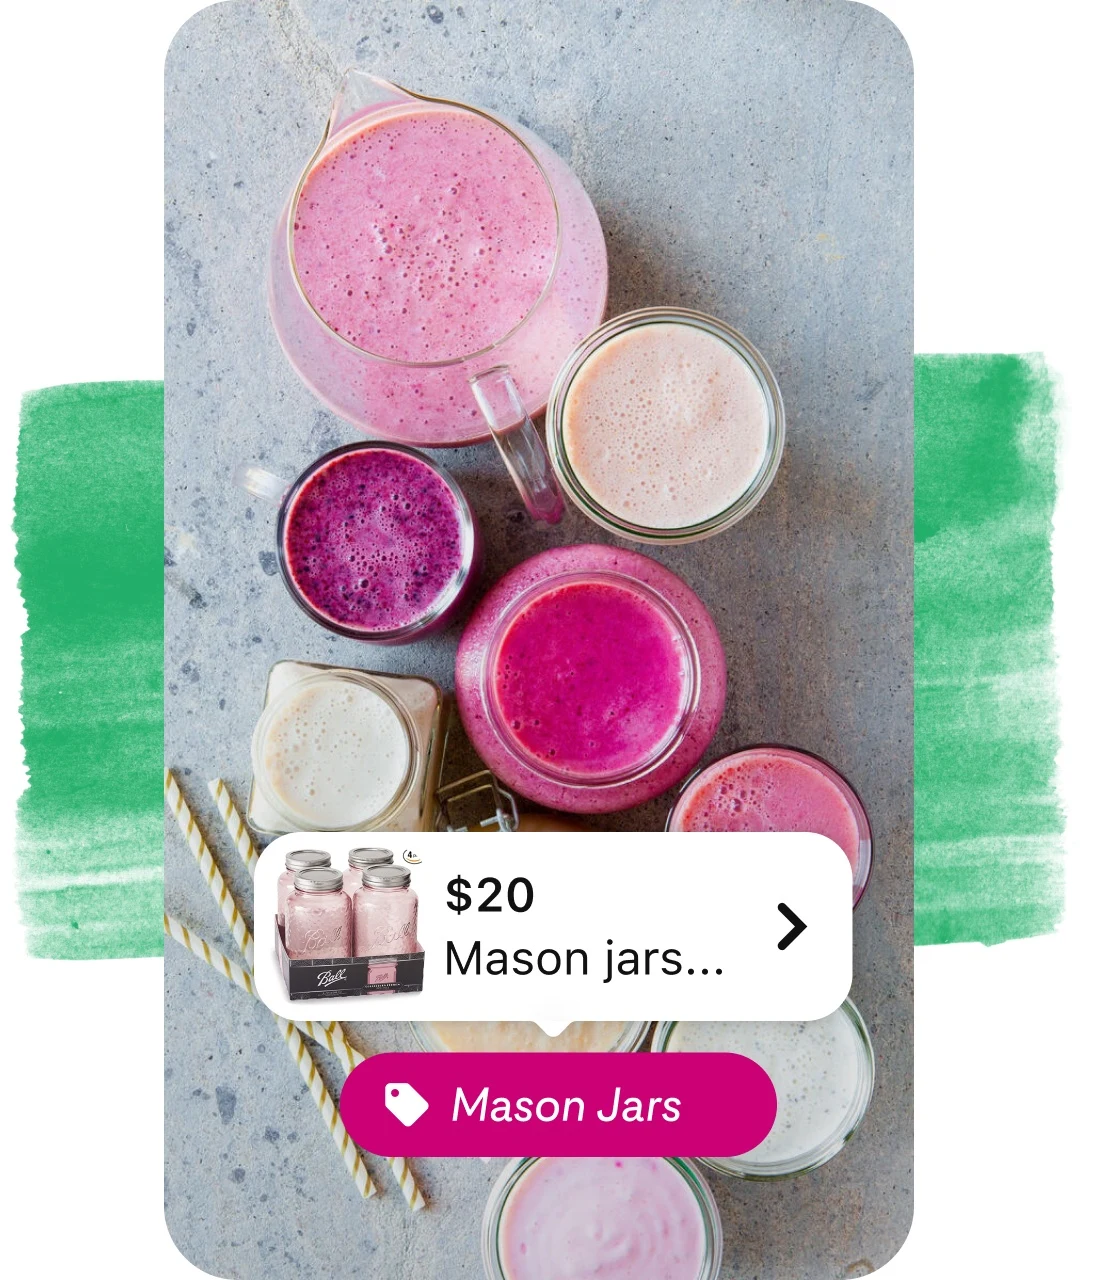 Shopping tag for mason jars overlaid on pin of juice in glasses